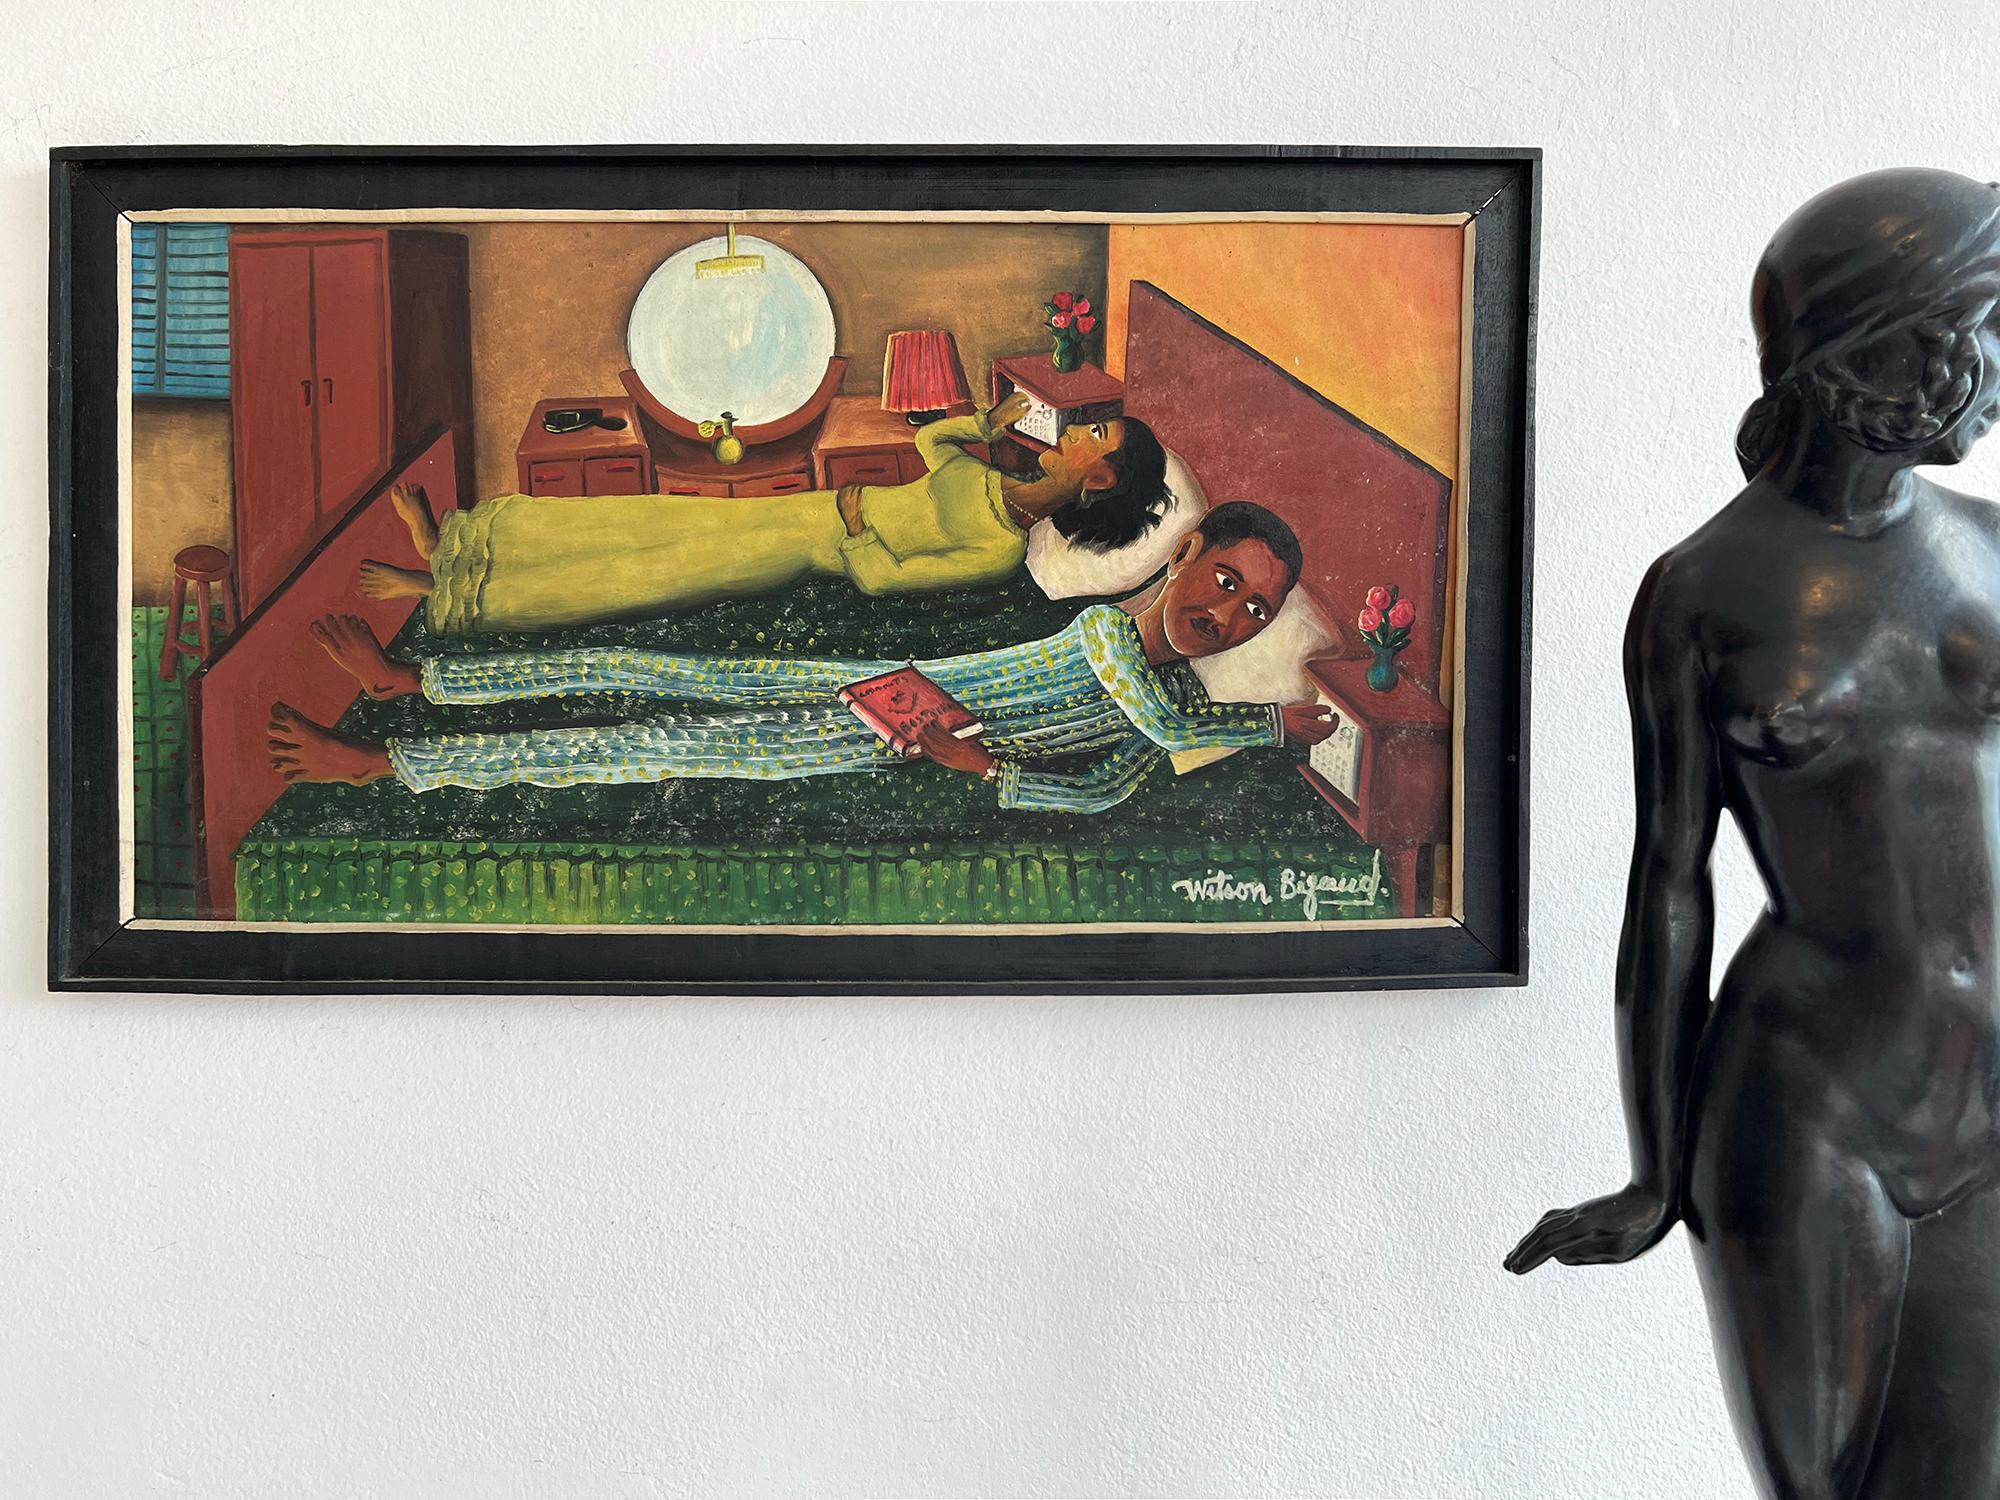 Haitian Couple in Bed Simultaneously Adjusting their Radios, Surrealism - Surrealist Painting by Wilson Bigaud